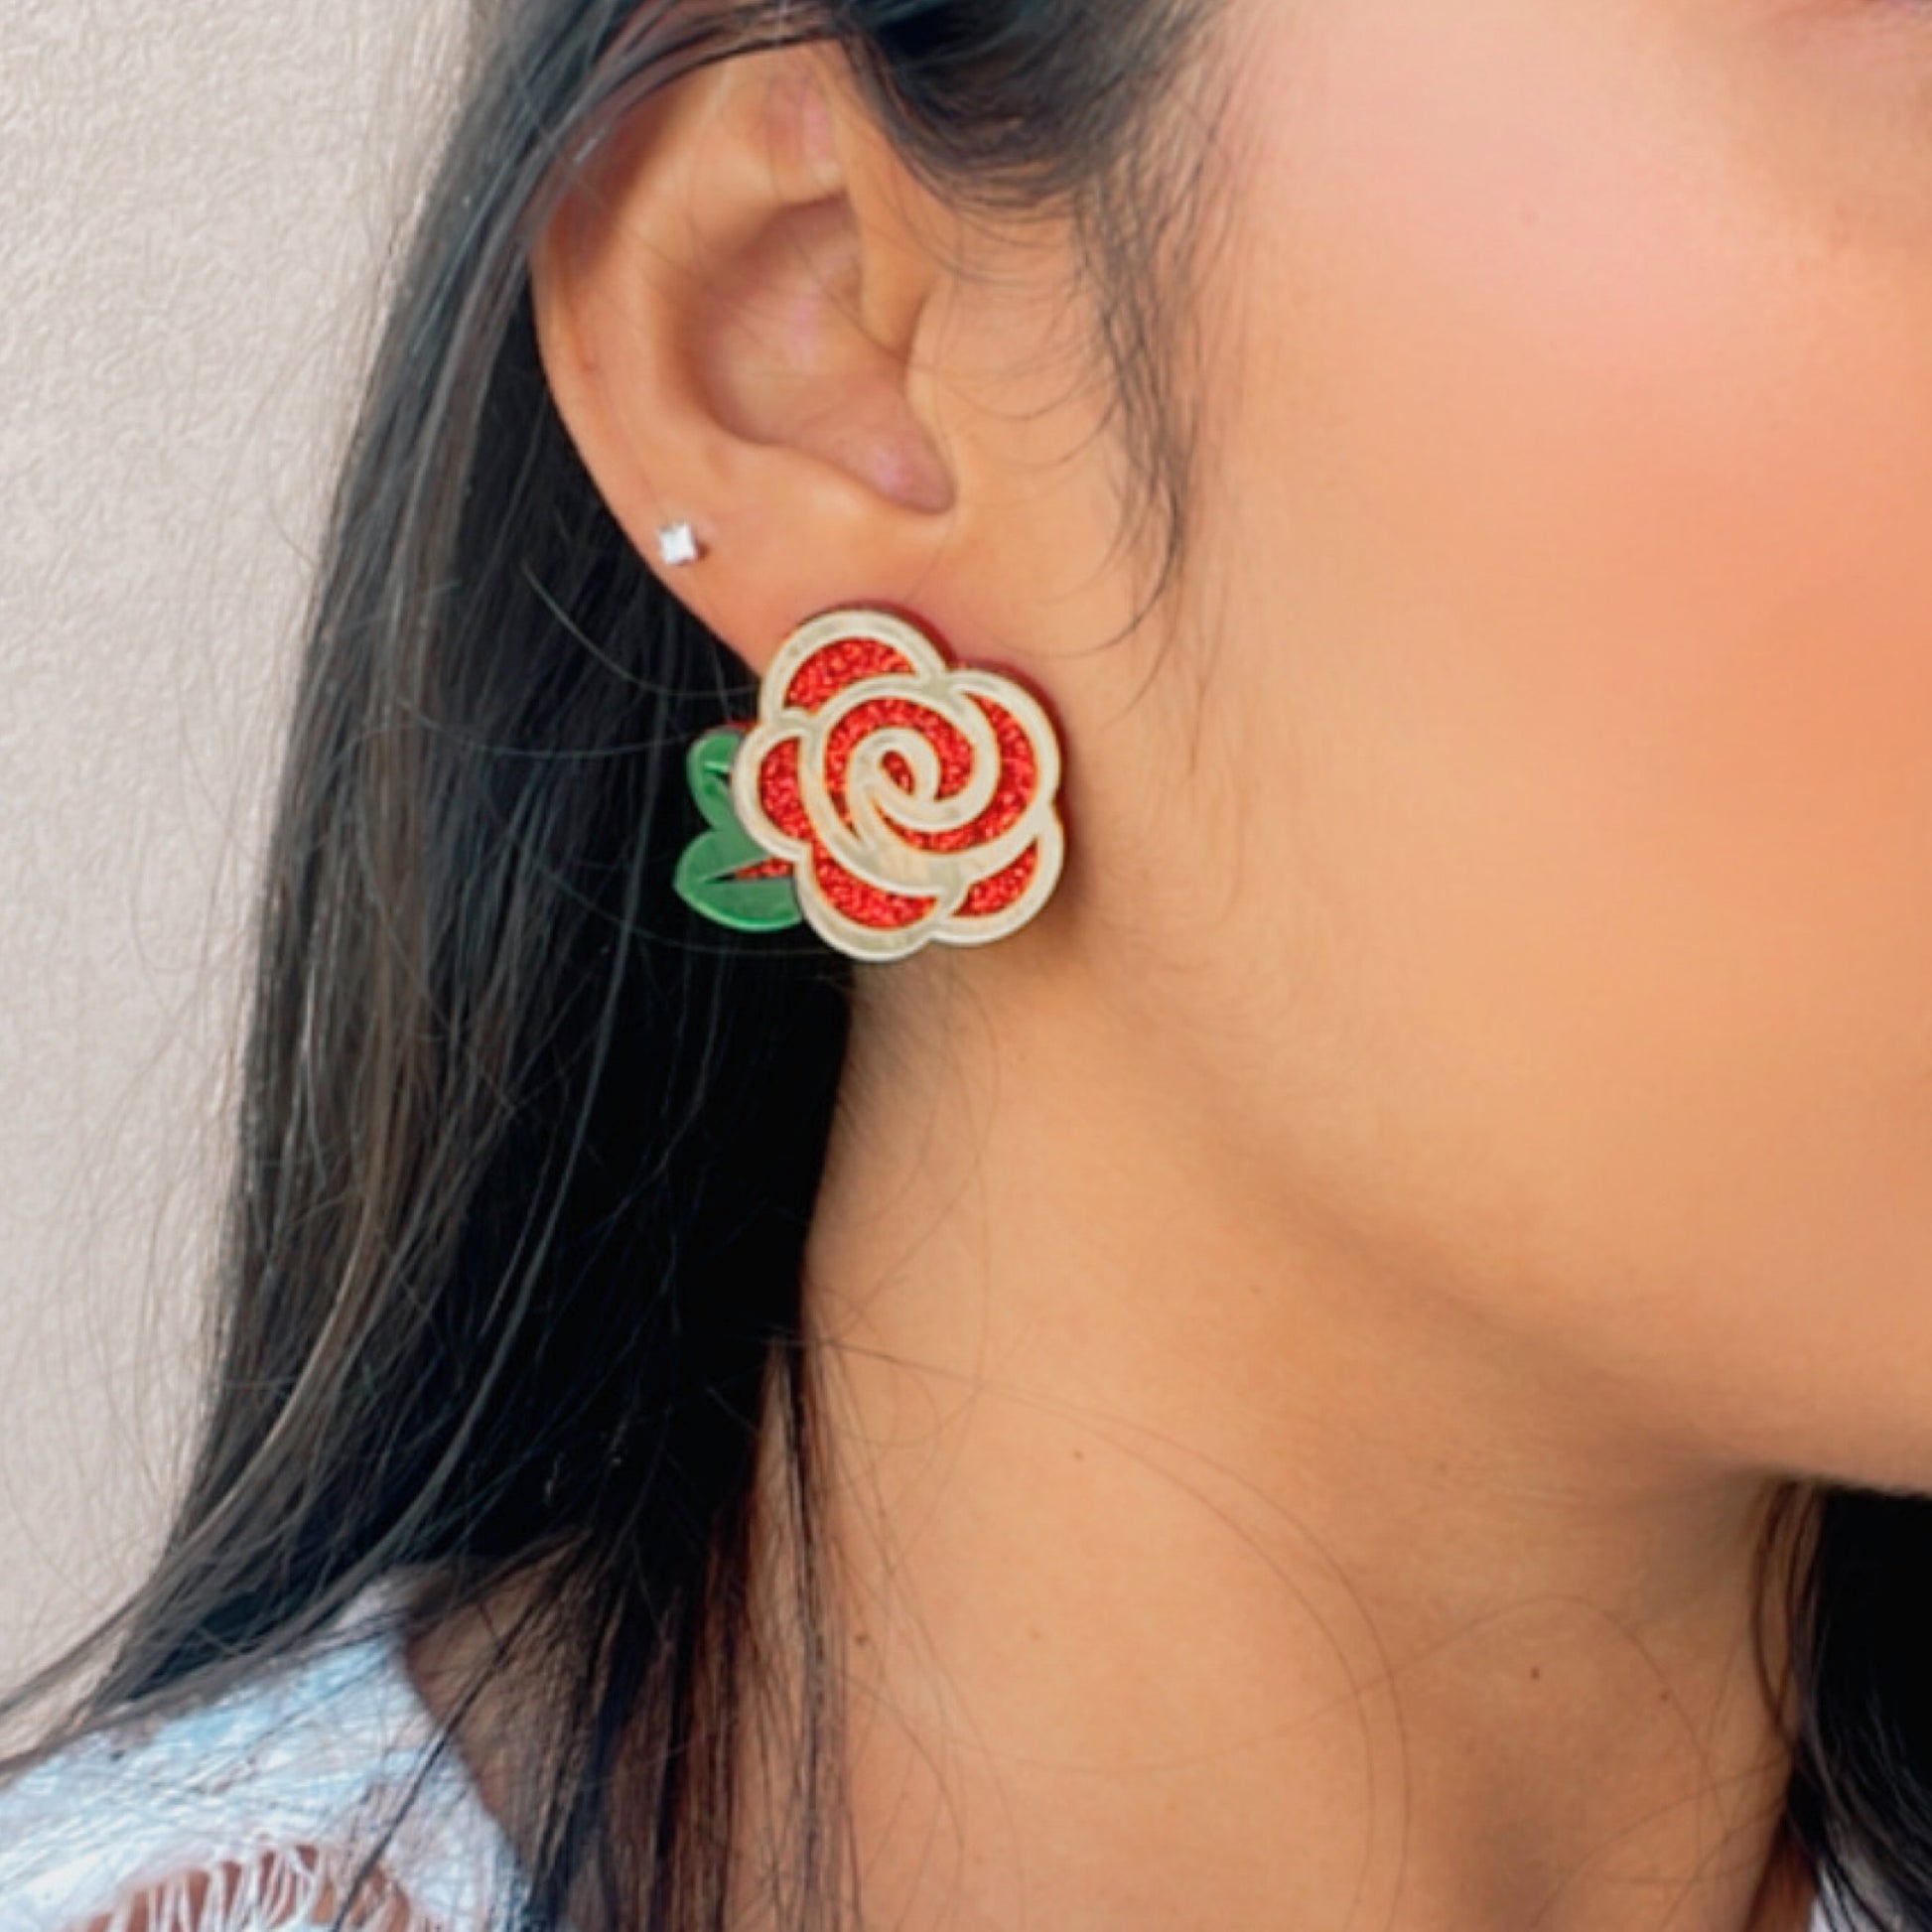 Ravishing Rose Earrings - Shimmer Red, Glossy Golden and Green - Nian by Nidhi - worn by a woman